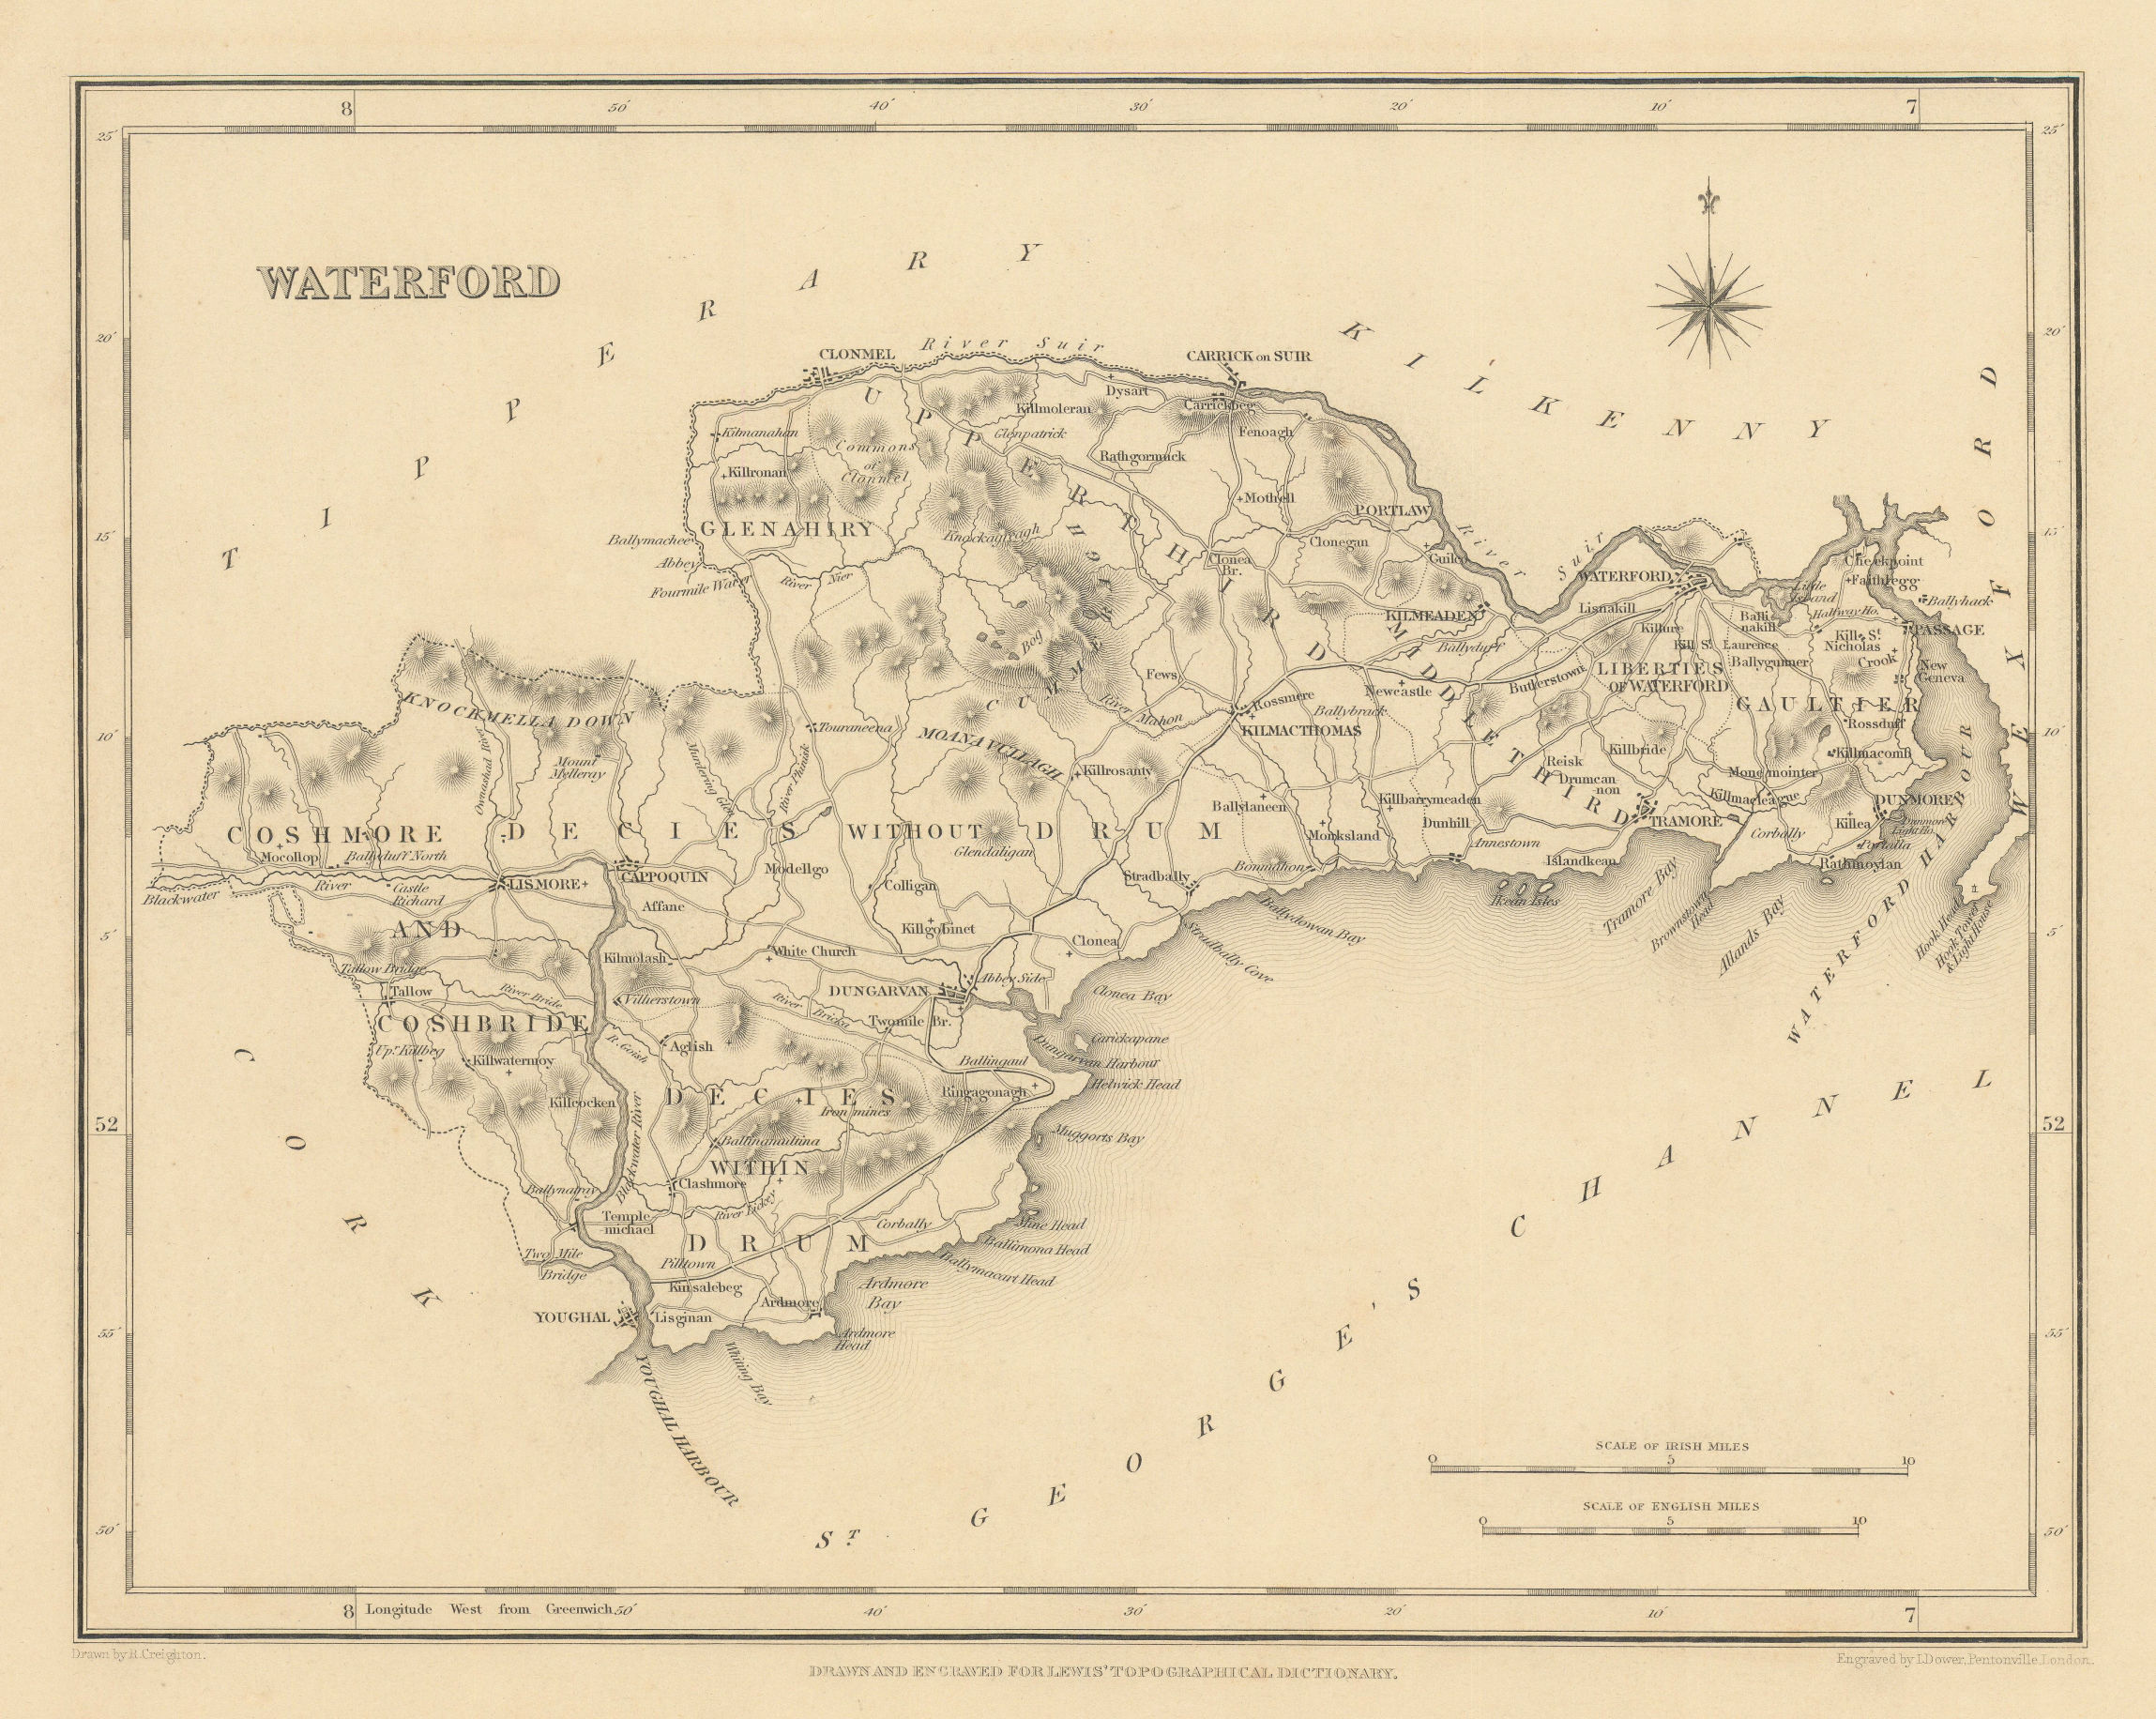 COUNTY WATERFORD antique map for LEWIS by CREIGHTON & DOWER - Ireland 1837